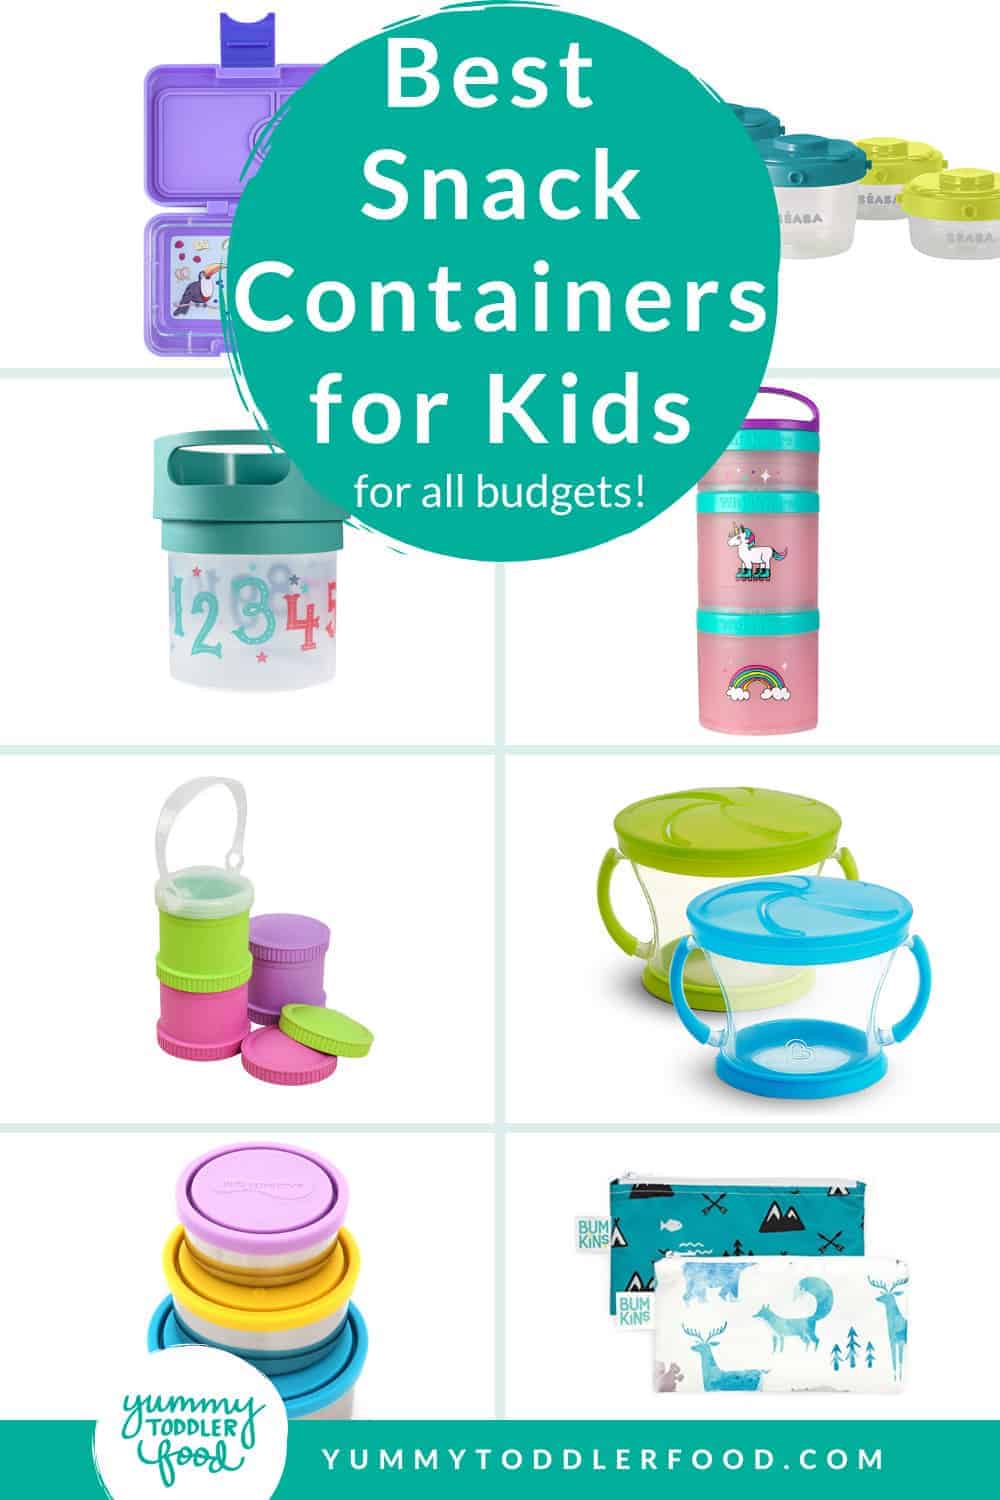 snack-containers-pin-1